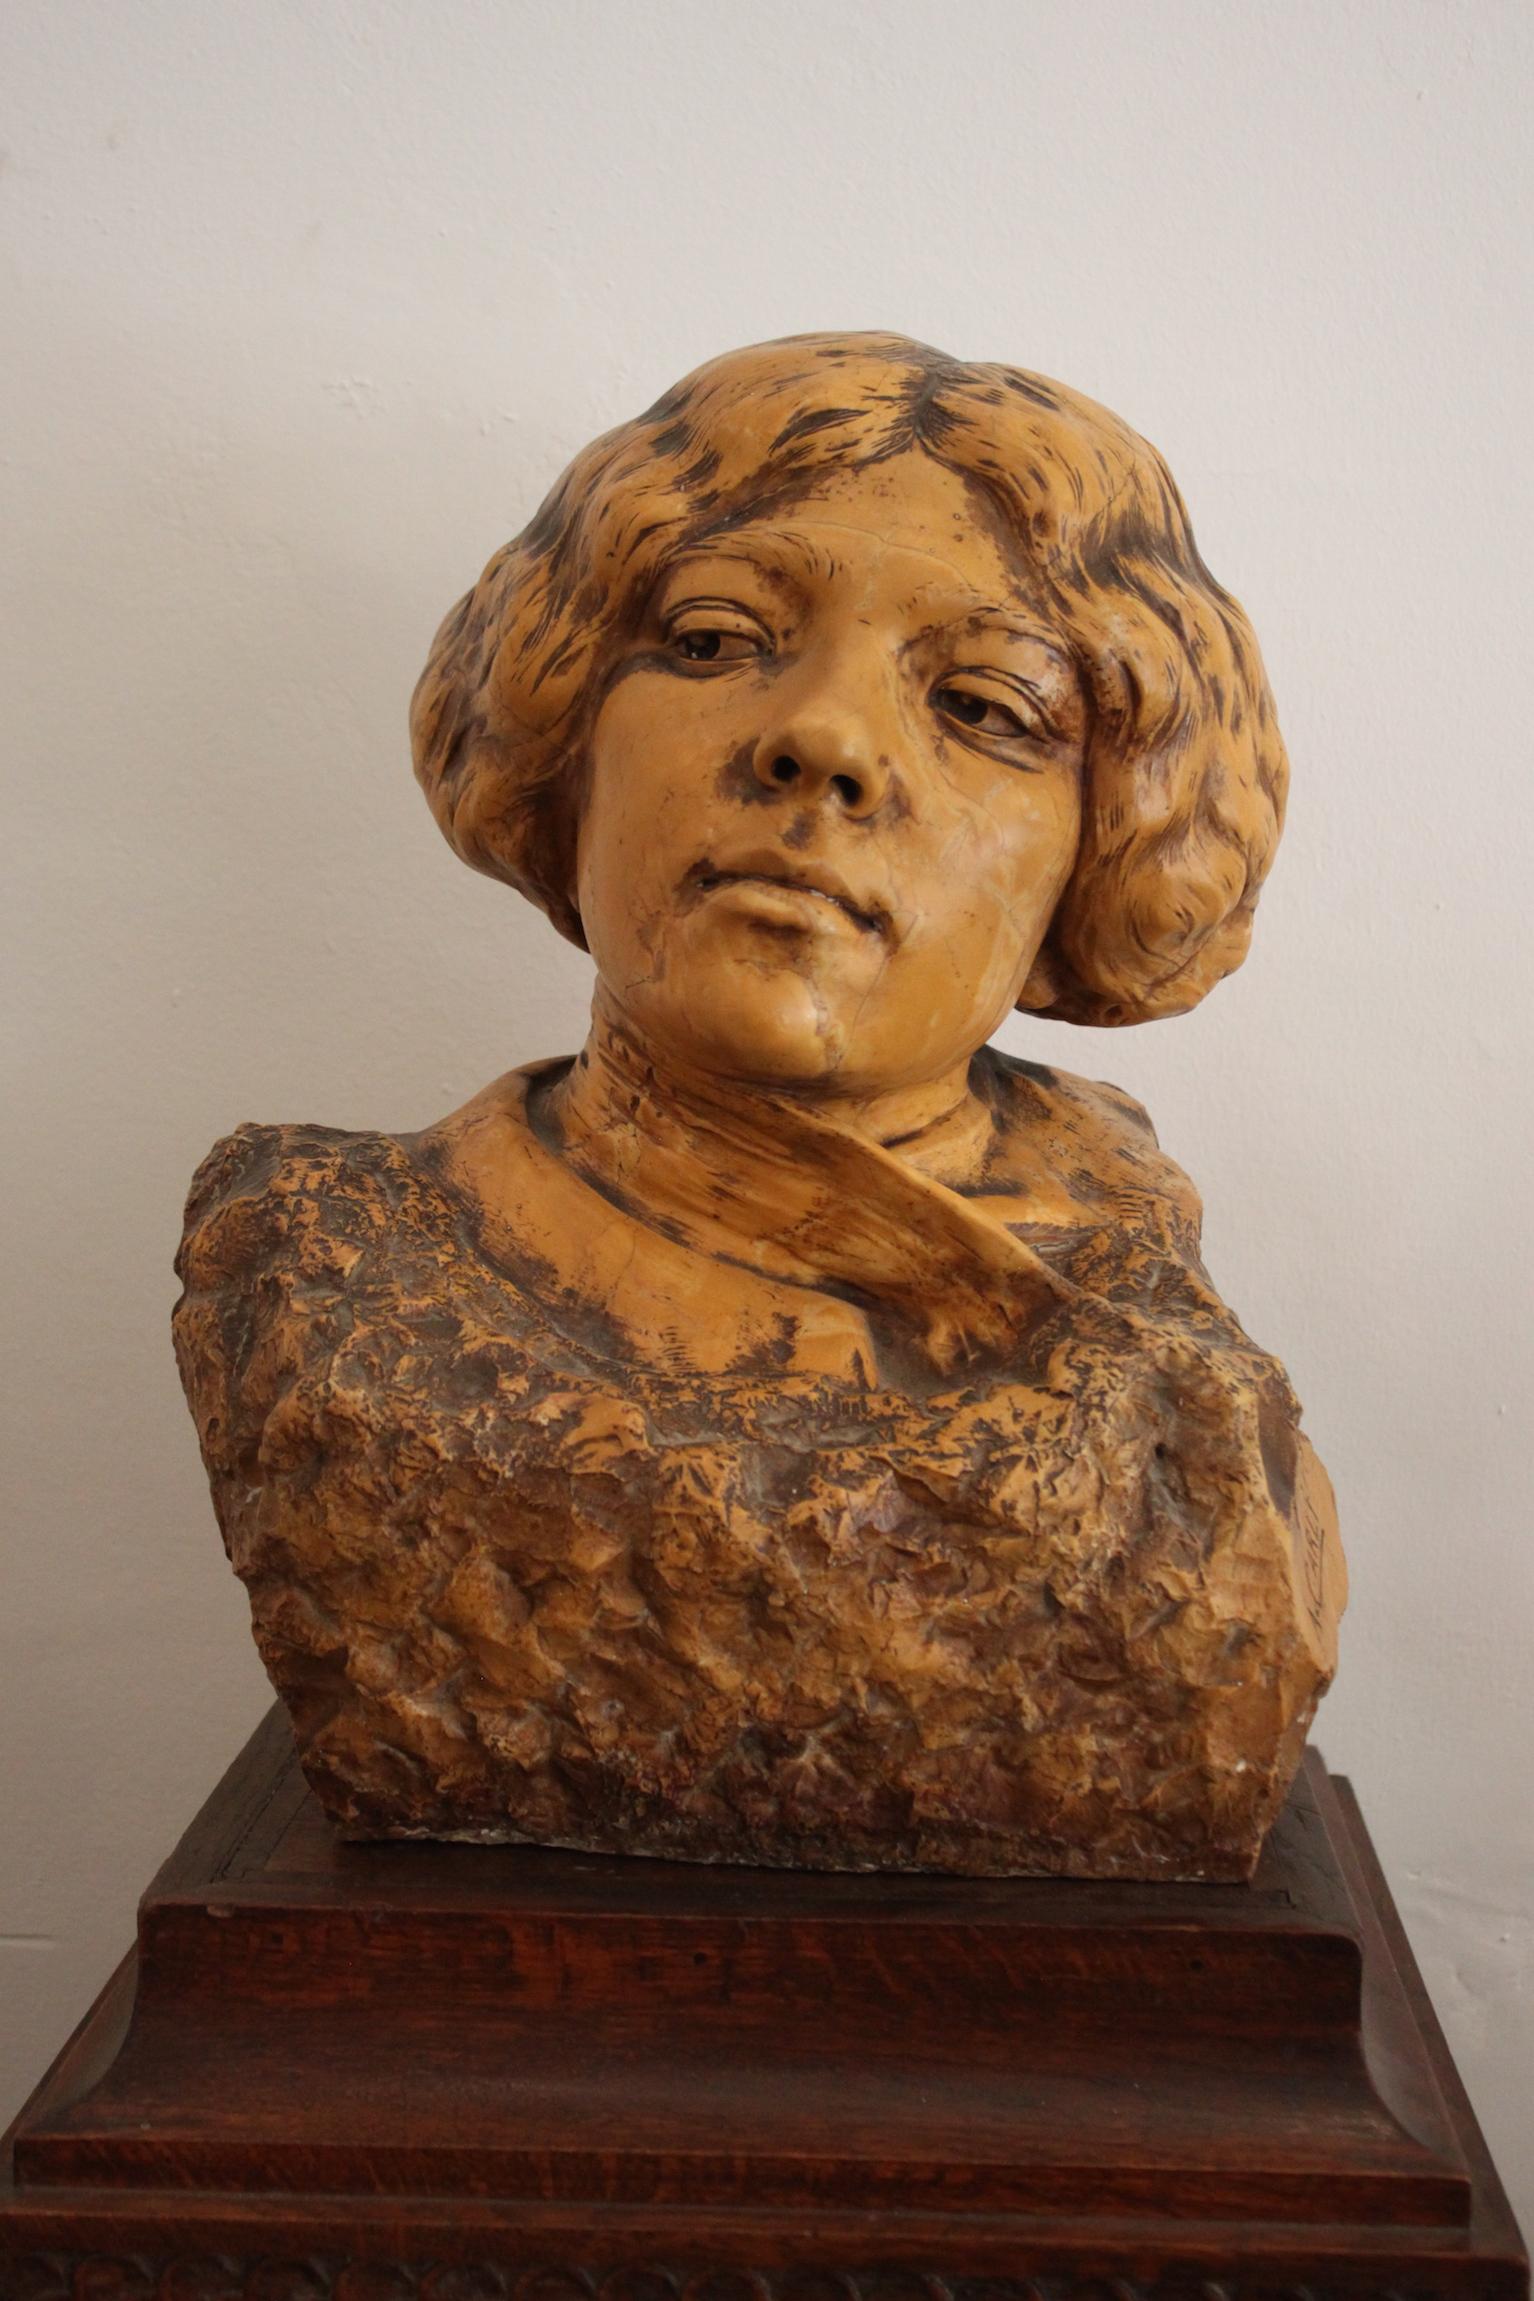 Sarah Bernhardt Siena marble bust by French sculptor Auguste Carli (1868-1930) with its pedestal.
Perfect condition.
Dimension: Height 39cm, depth 25cm, width 33cm
With pedestal: 156cm.